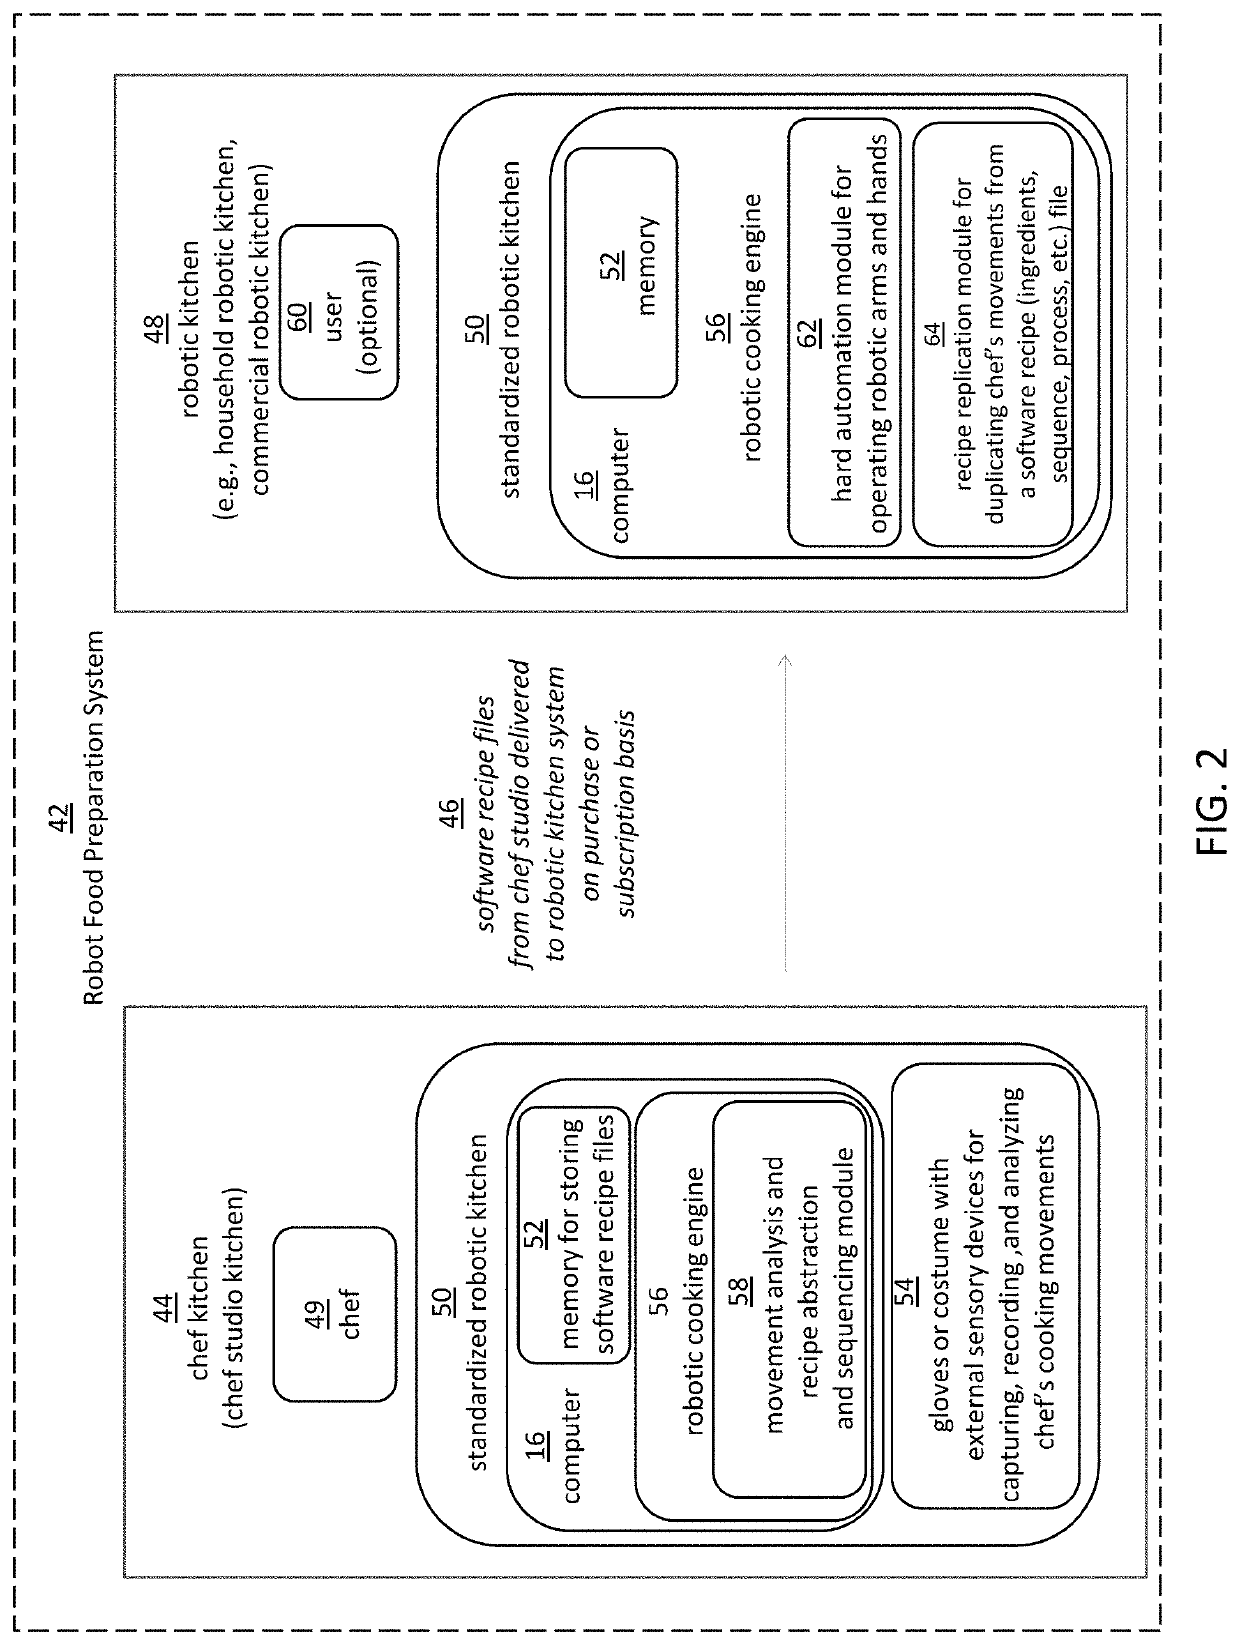 Robotic manipulation methods and systems for executing a domain-specific application in an instrumented enviornment with electronic minimanipulation libraries